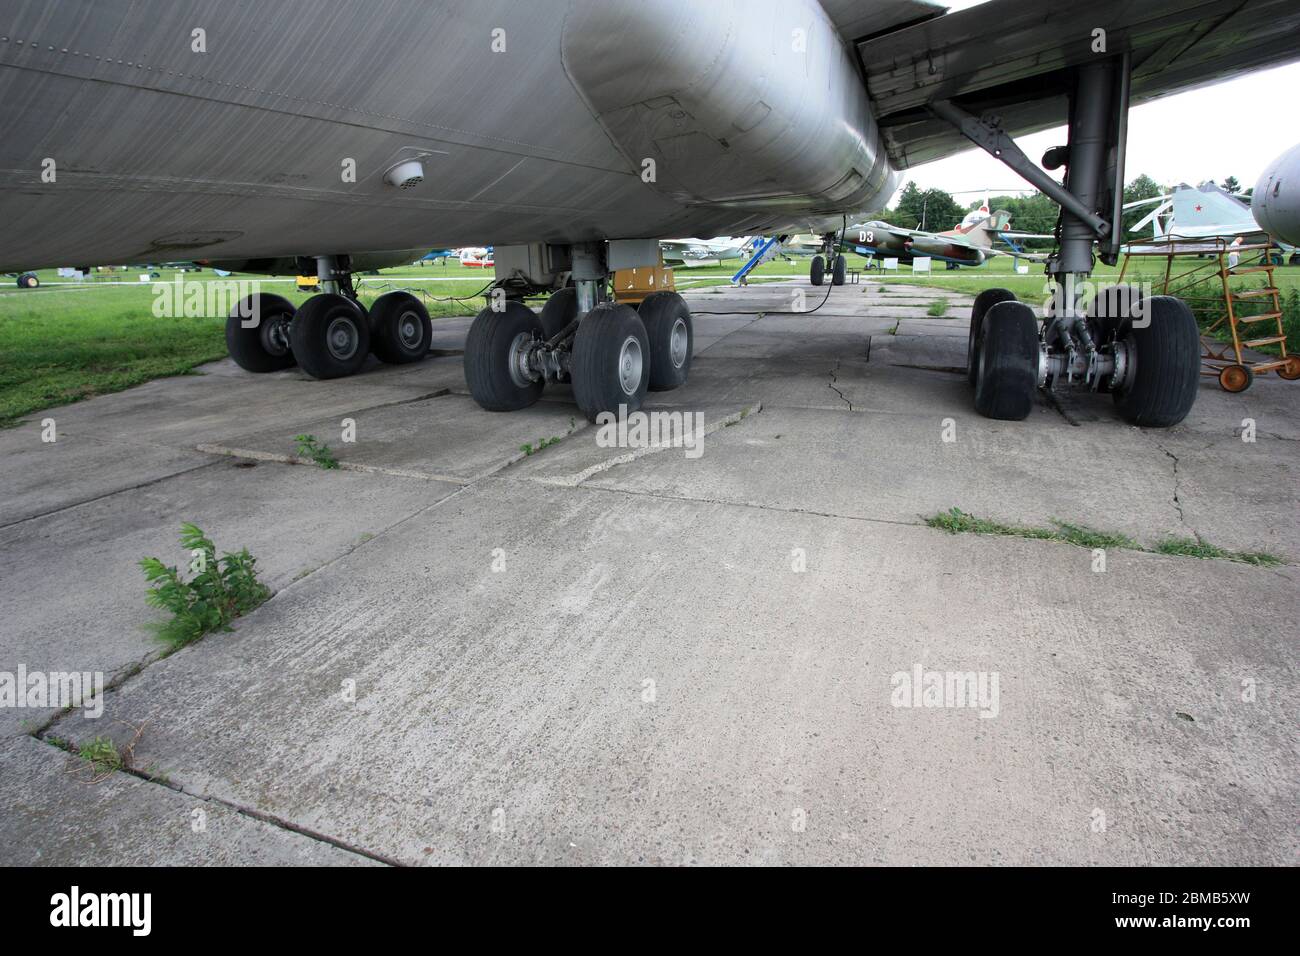 Broken pavement of the apron underneath an Ilyushin Il-86 due to the heavy weight of the plane (ACN vs. PCN) - Zhulyany Ukraine State Aviation Museum Stock Photo